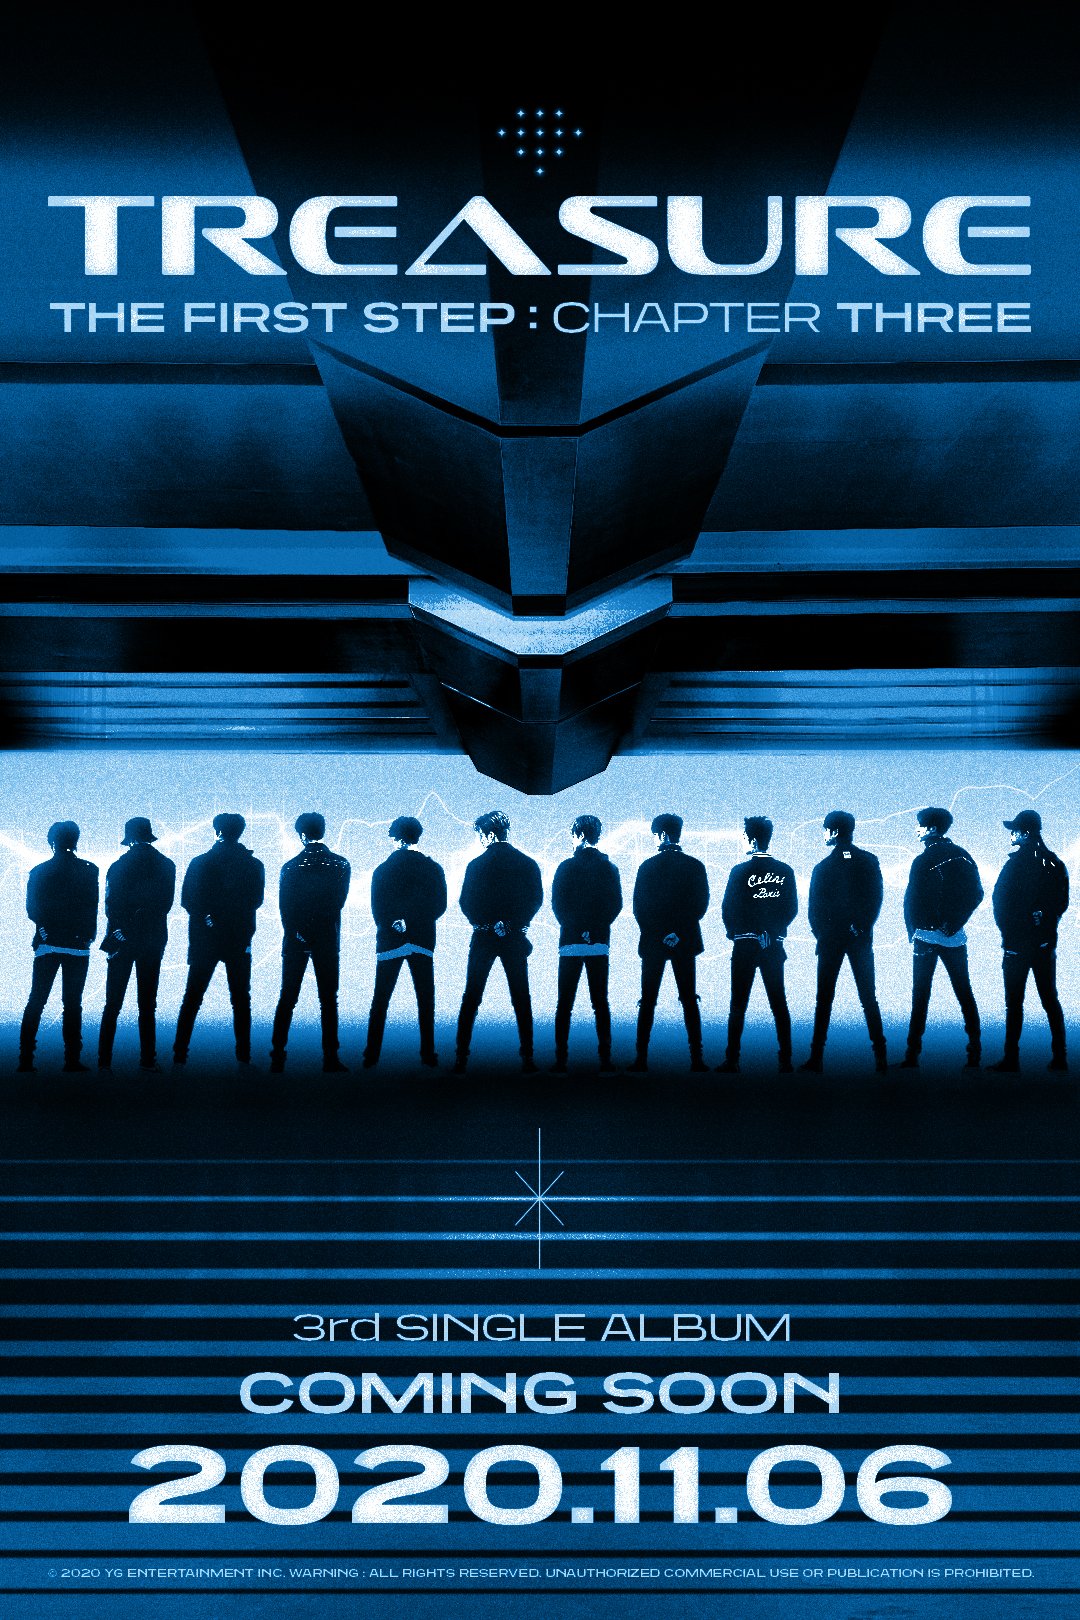 treasure-unveils-concept-video-for-3rd-single-album-the-first-step-chapter-three-3